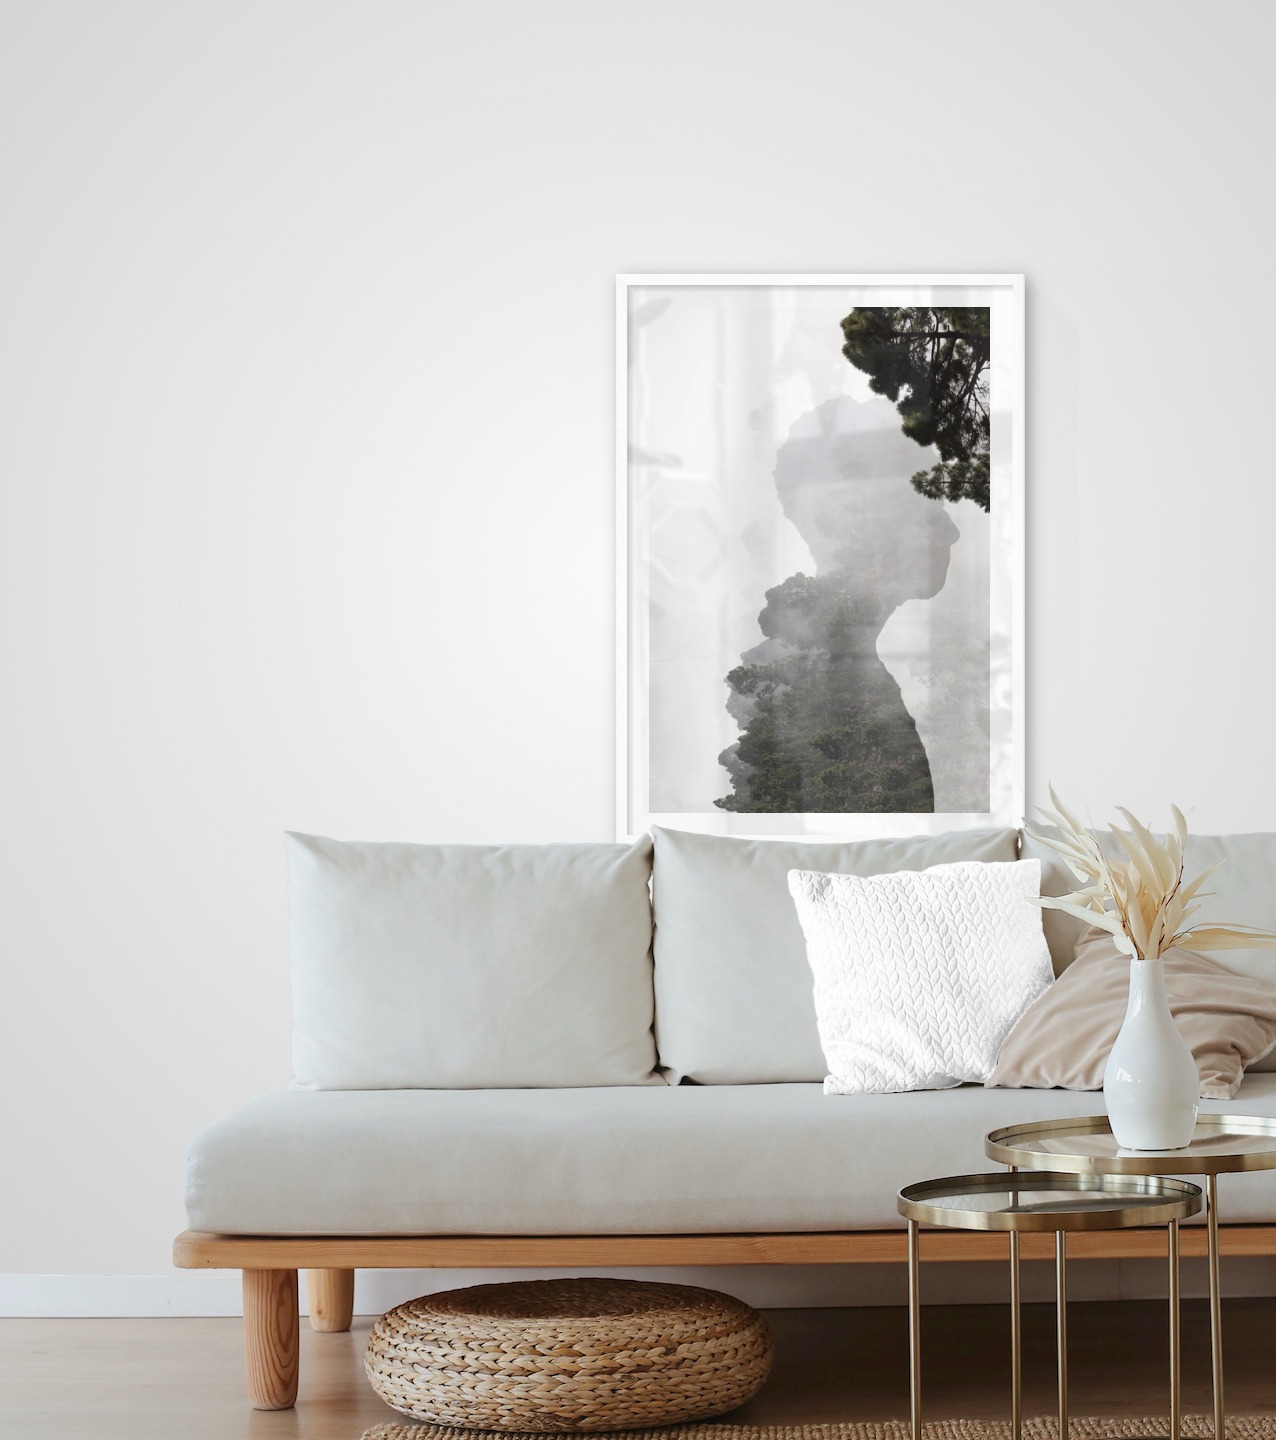 Gallery wall with picture frame in white in size 70x100 with print "Silhouette and tree"